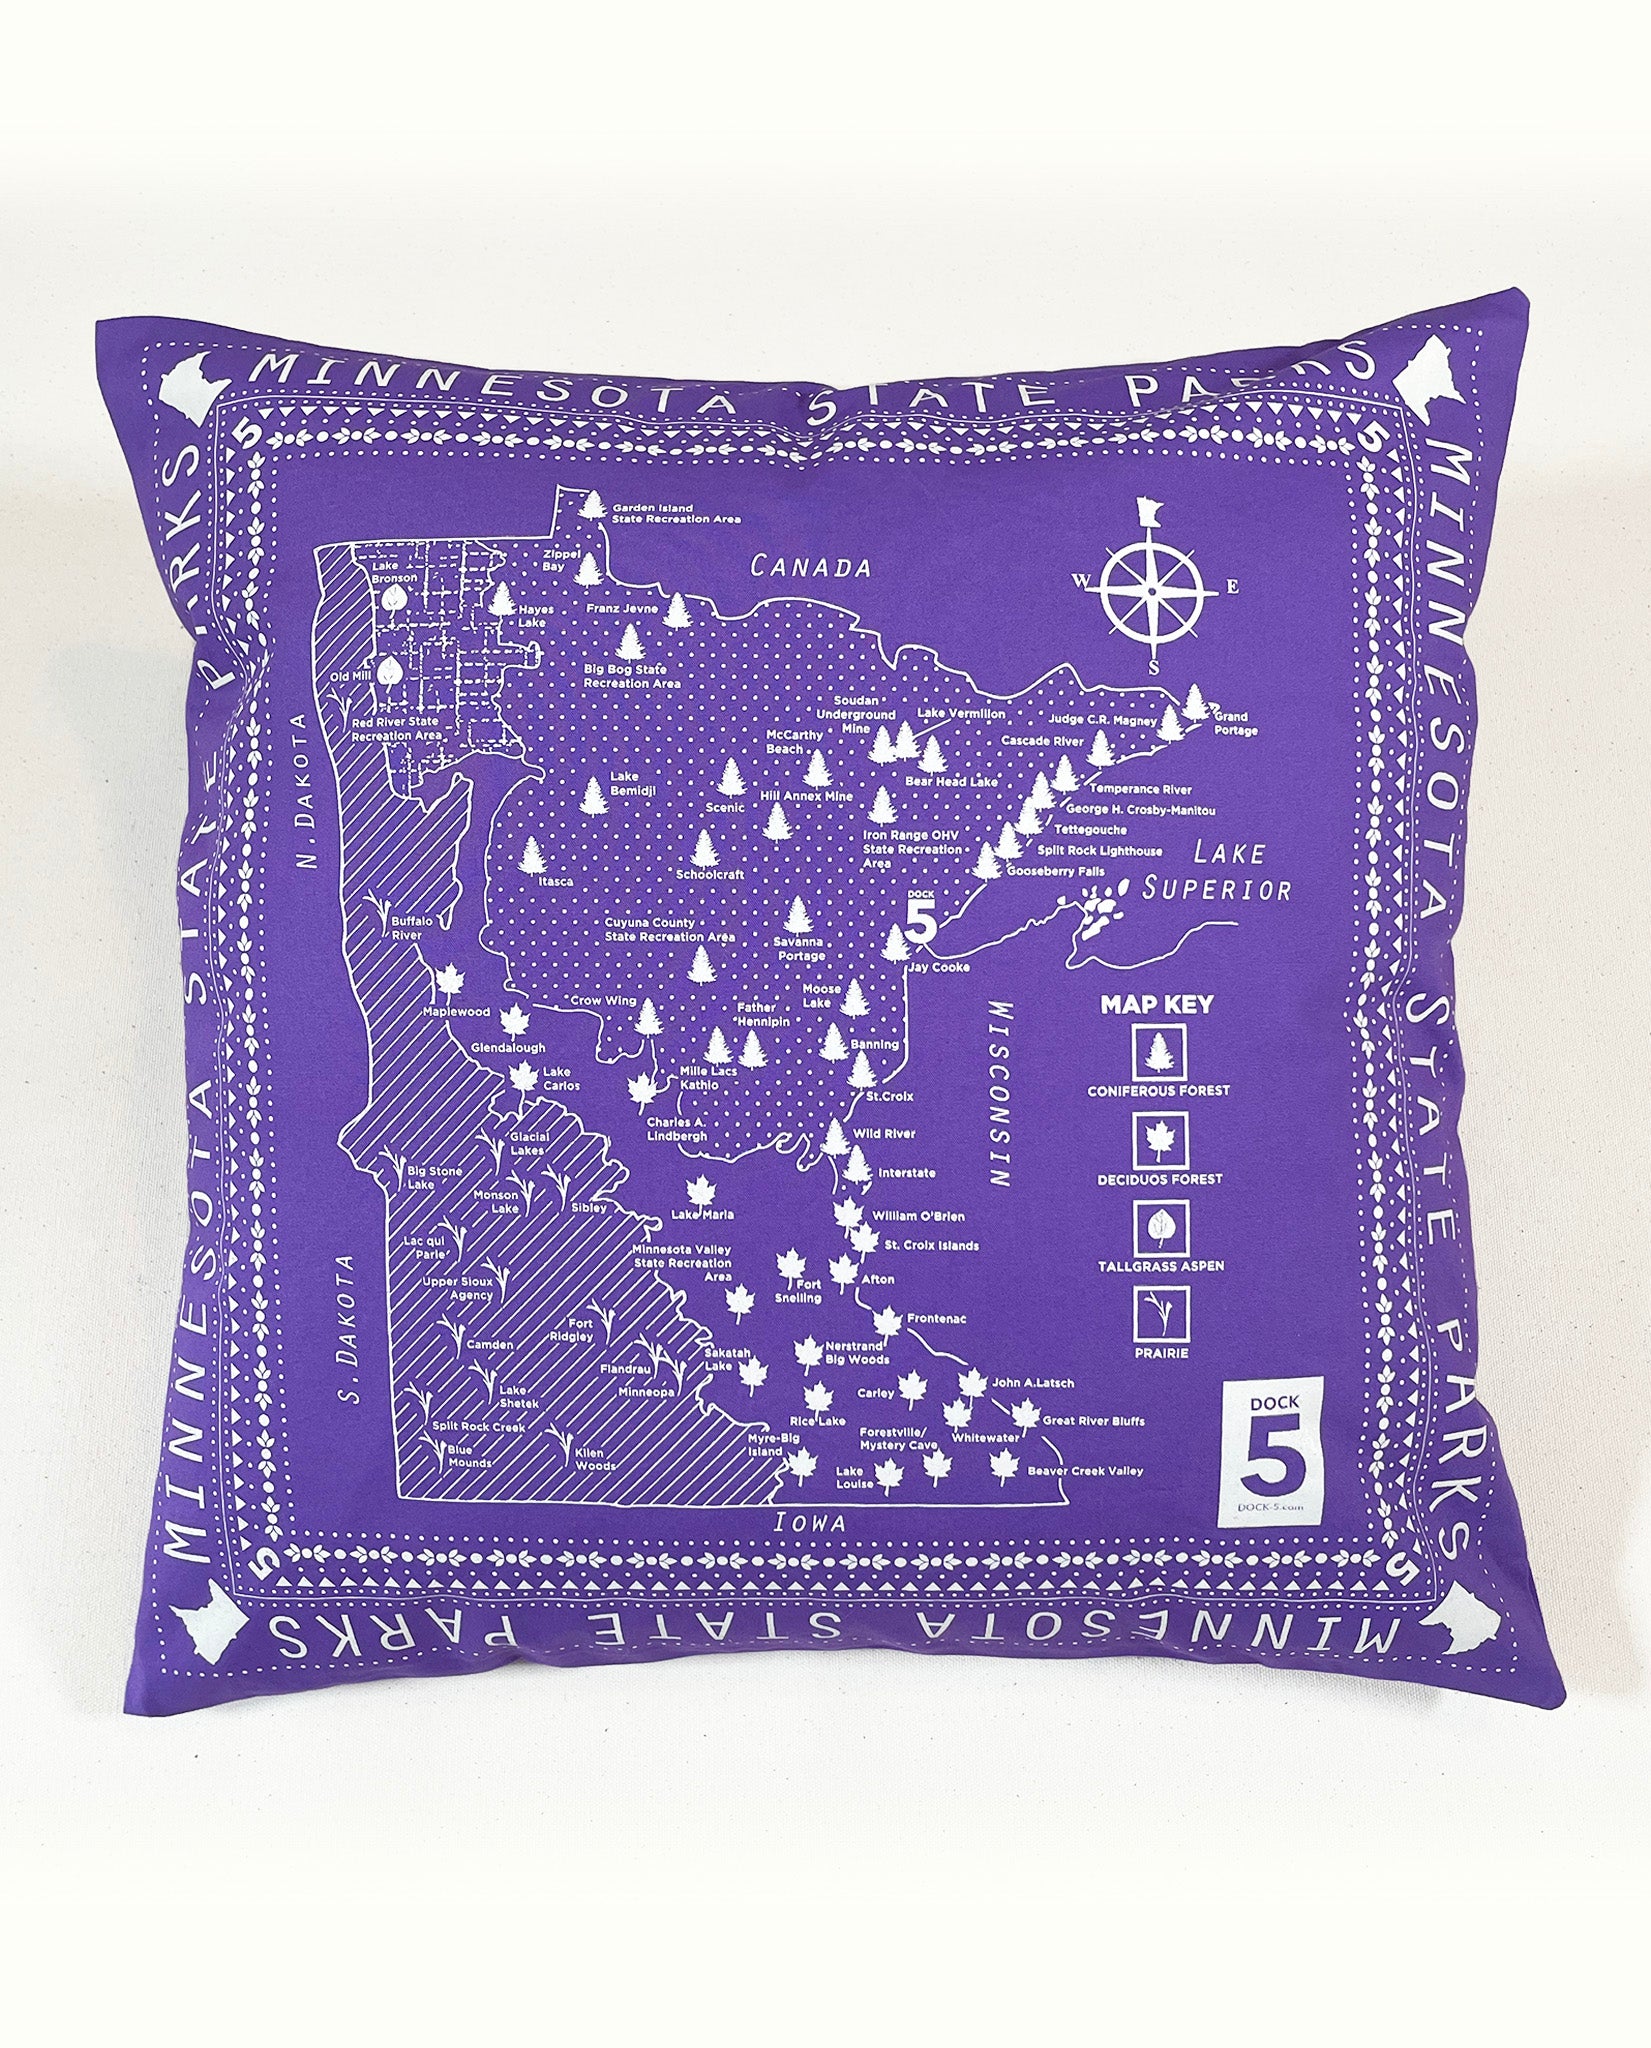 Minnesota State Parks Bandanna Pillow Cover Purple Handcrafted by Natalija Walbridge for Dock 5